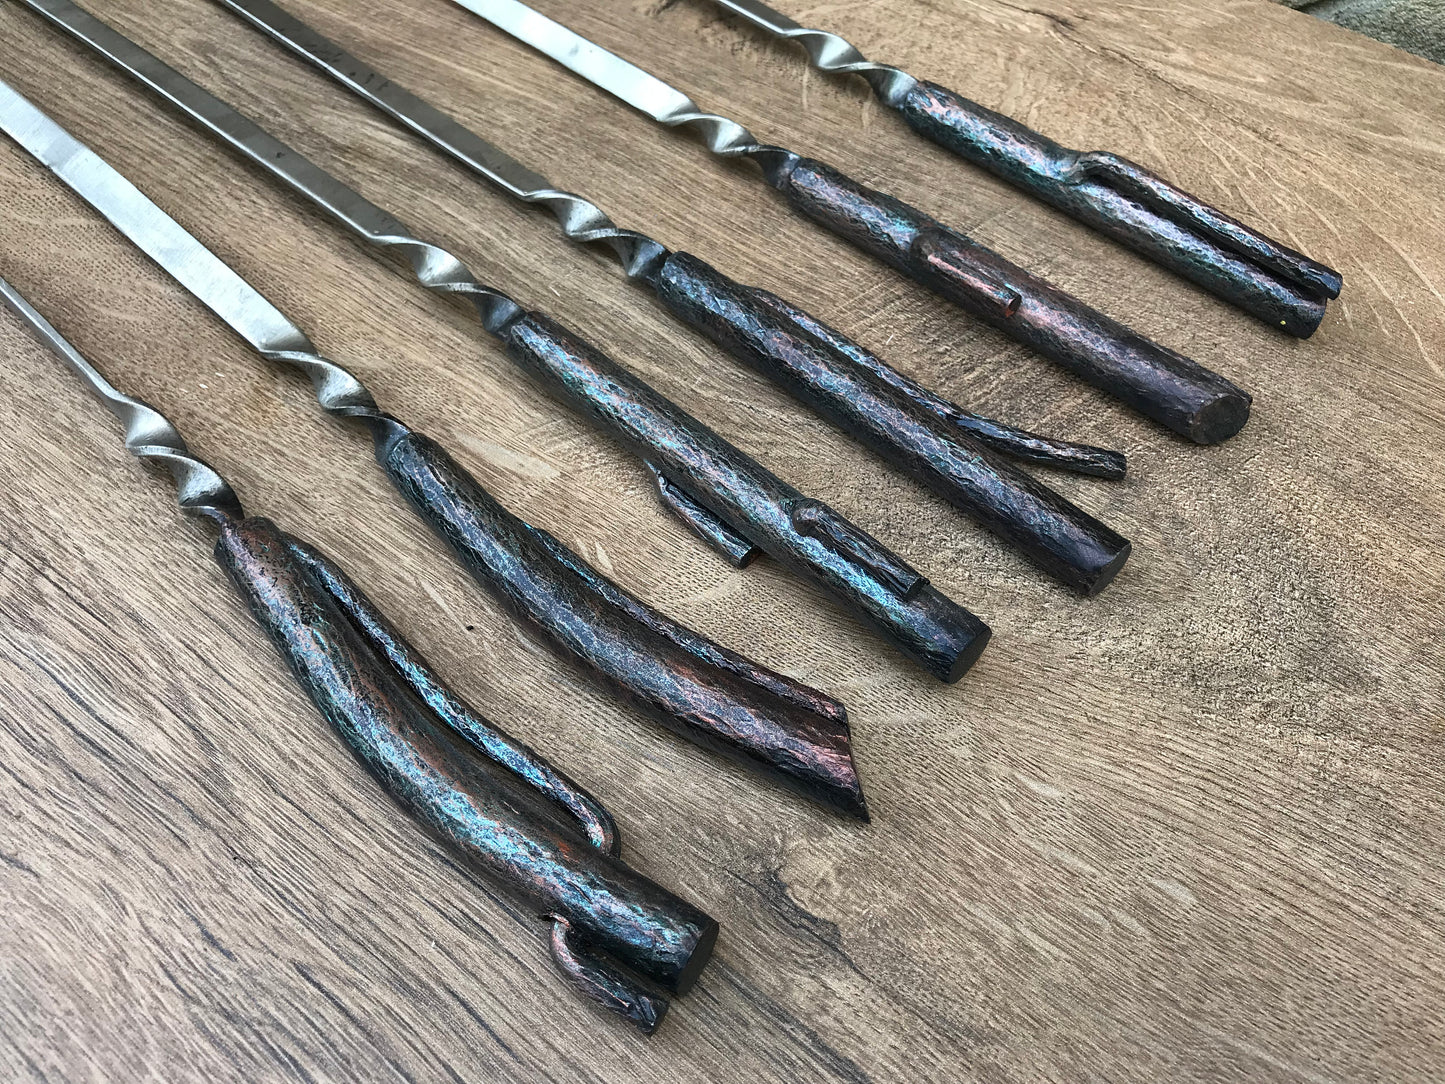 Skewers, hand forged skewers, iron gift, grilled meat, grill accessories, barbecue, BBQ, gift for Dad,picnic,iron anniversary gift,fireplace